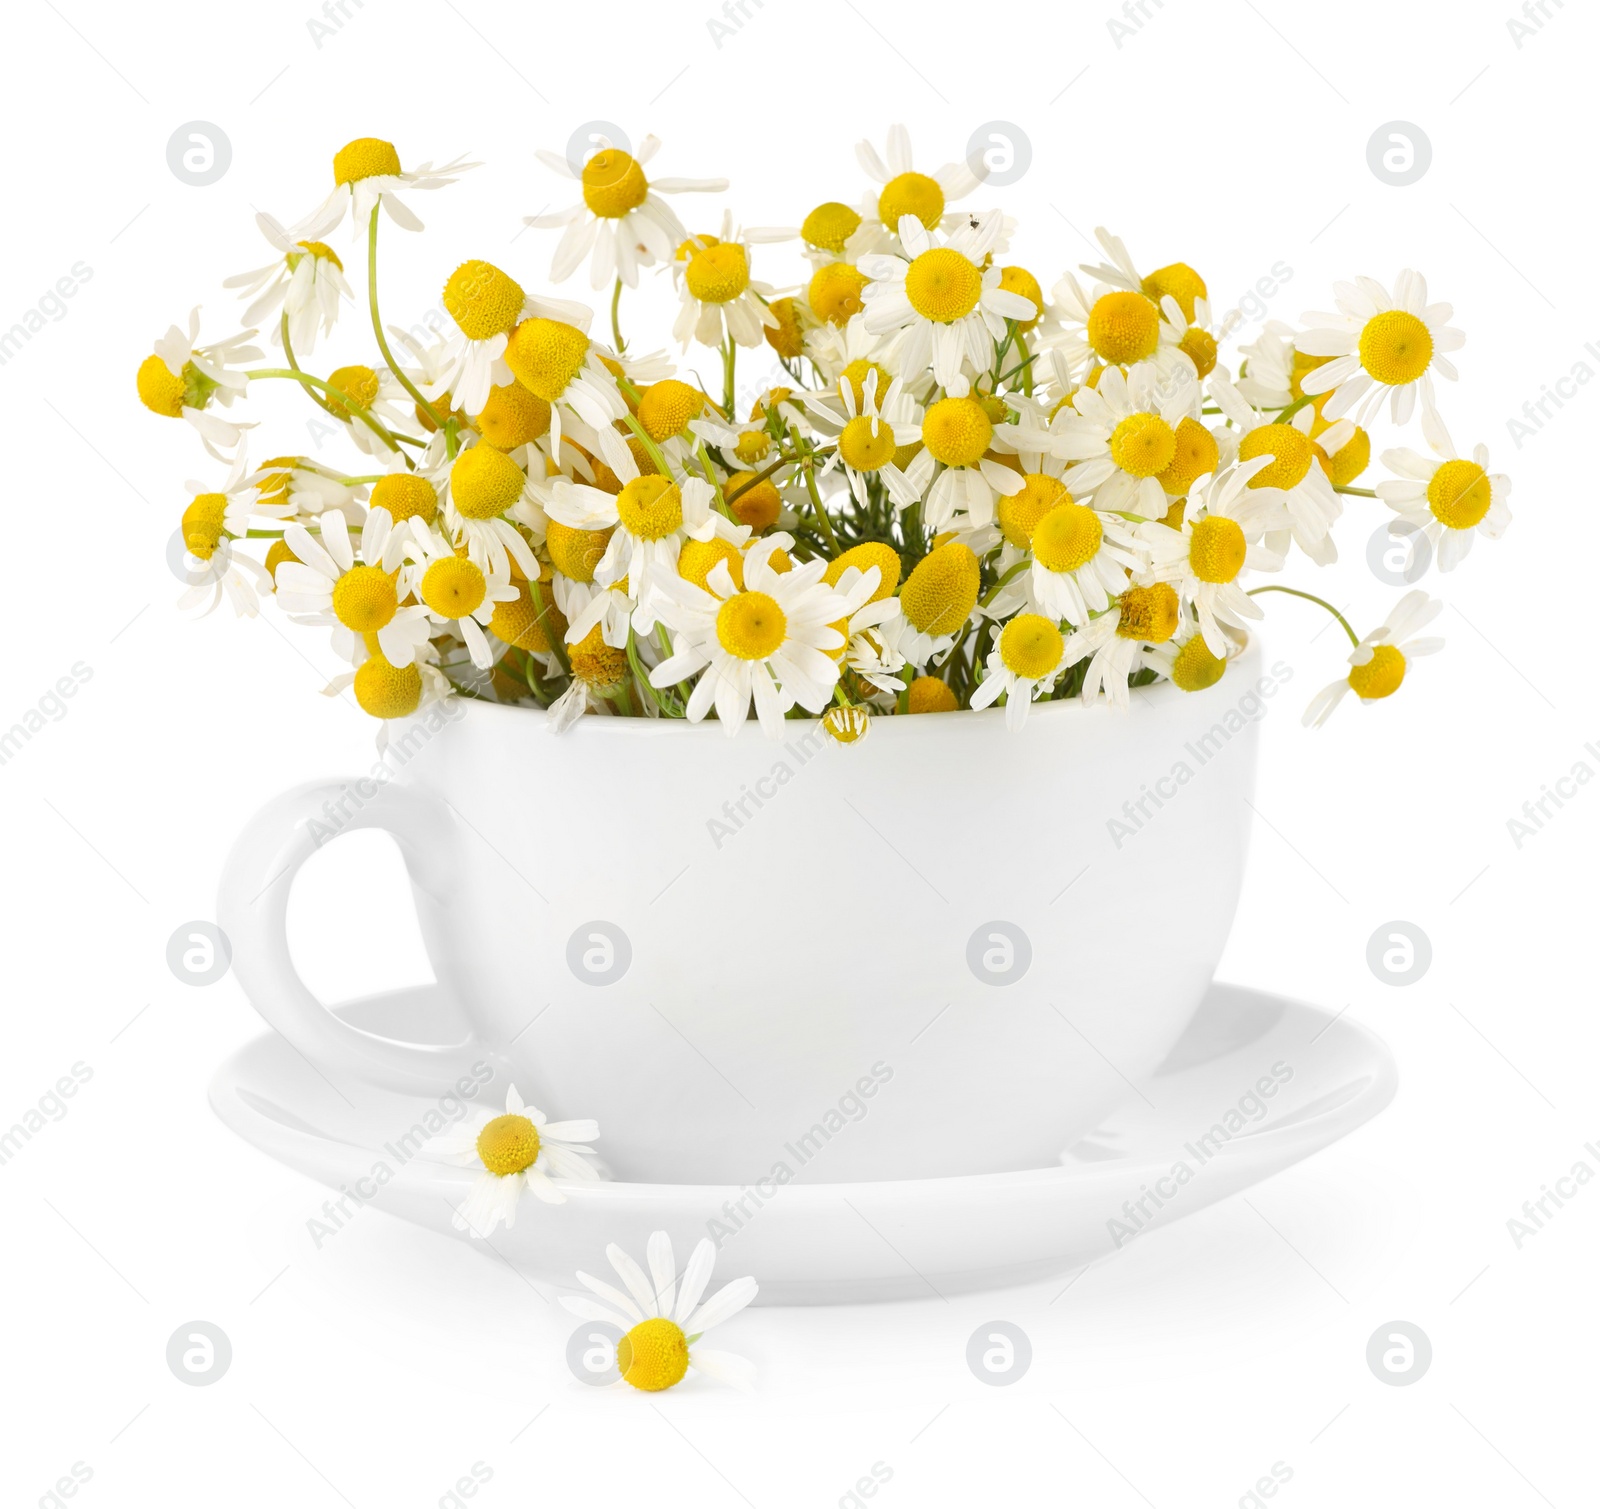 Photo of Aromatic herbal tea in cup with chamomile flowers isolated on white